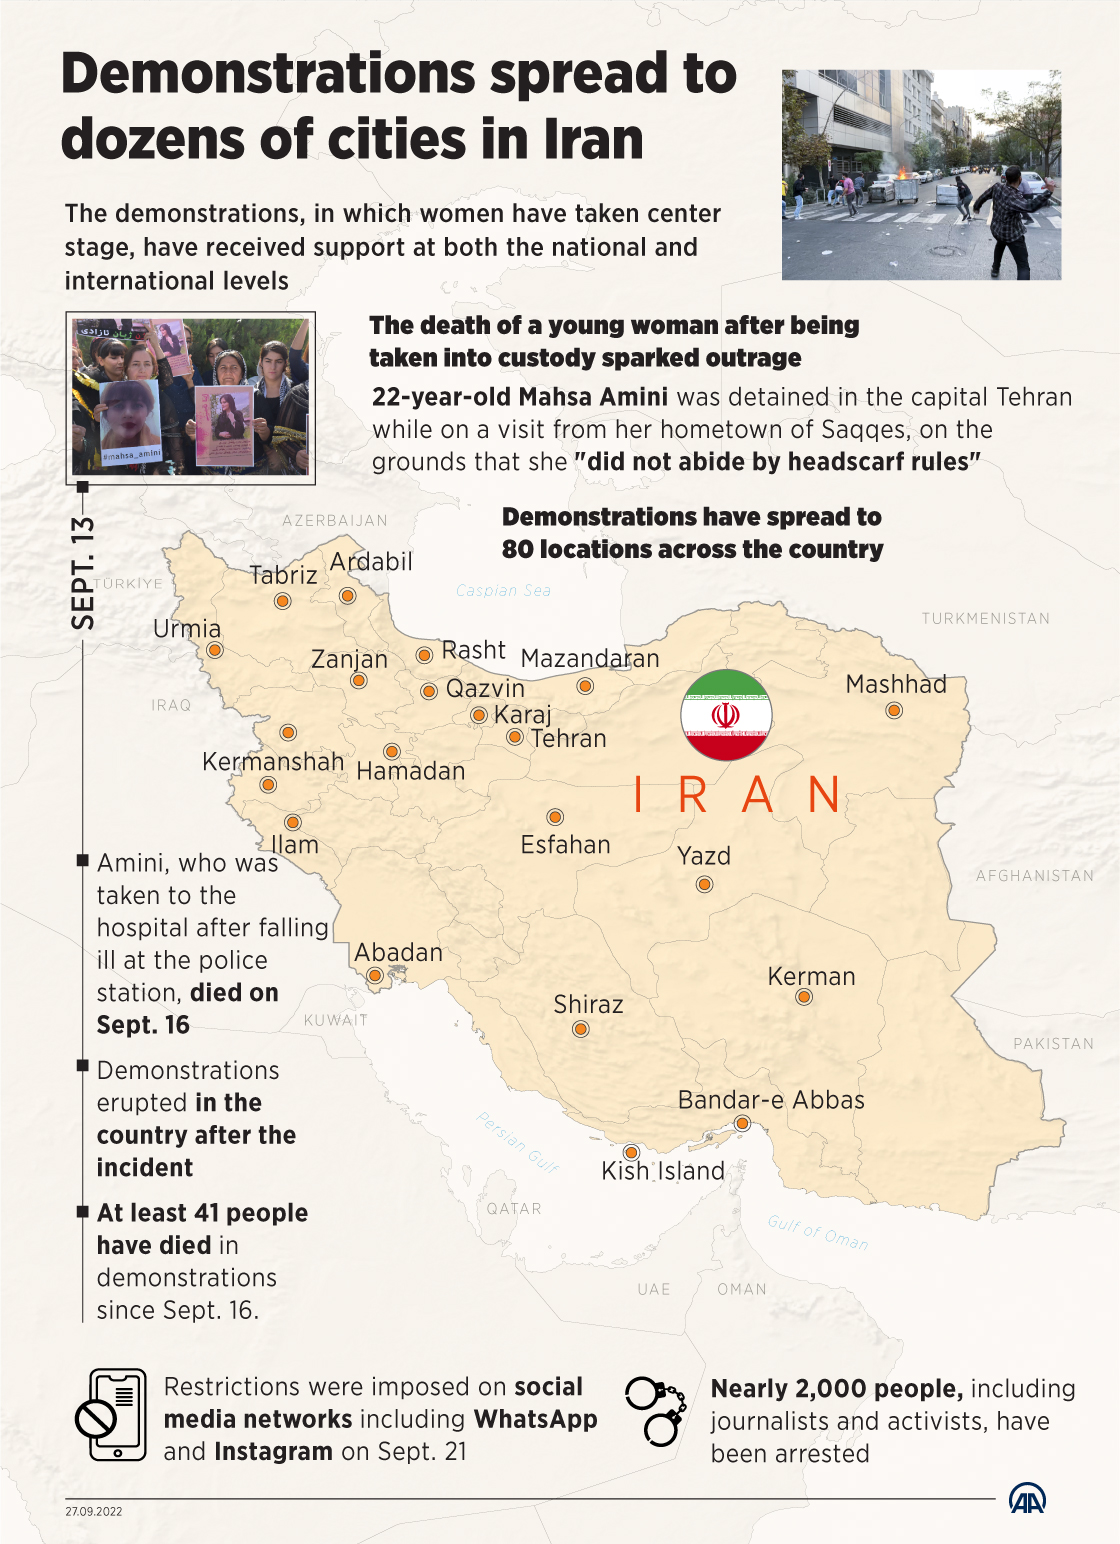 Demonstrations spread to dozens of cities in Iran